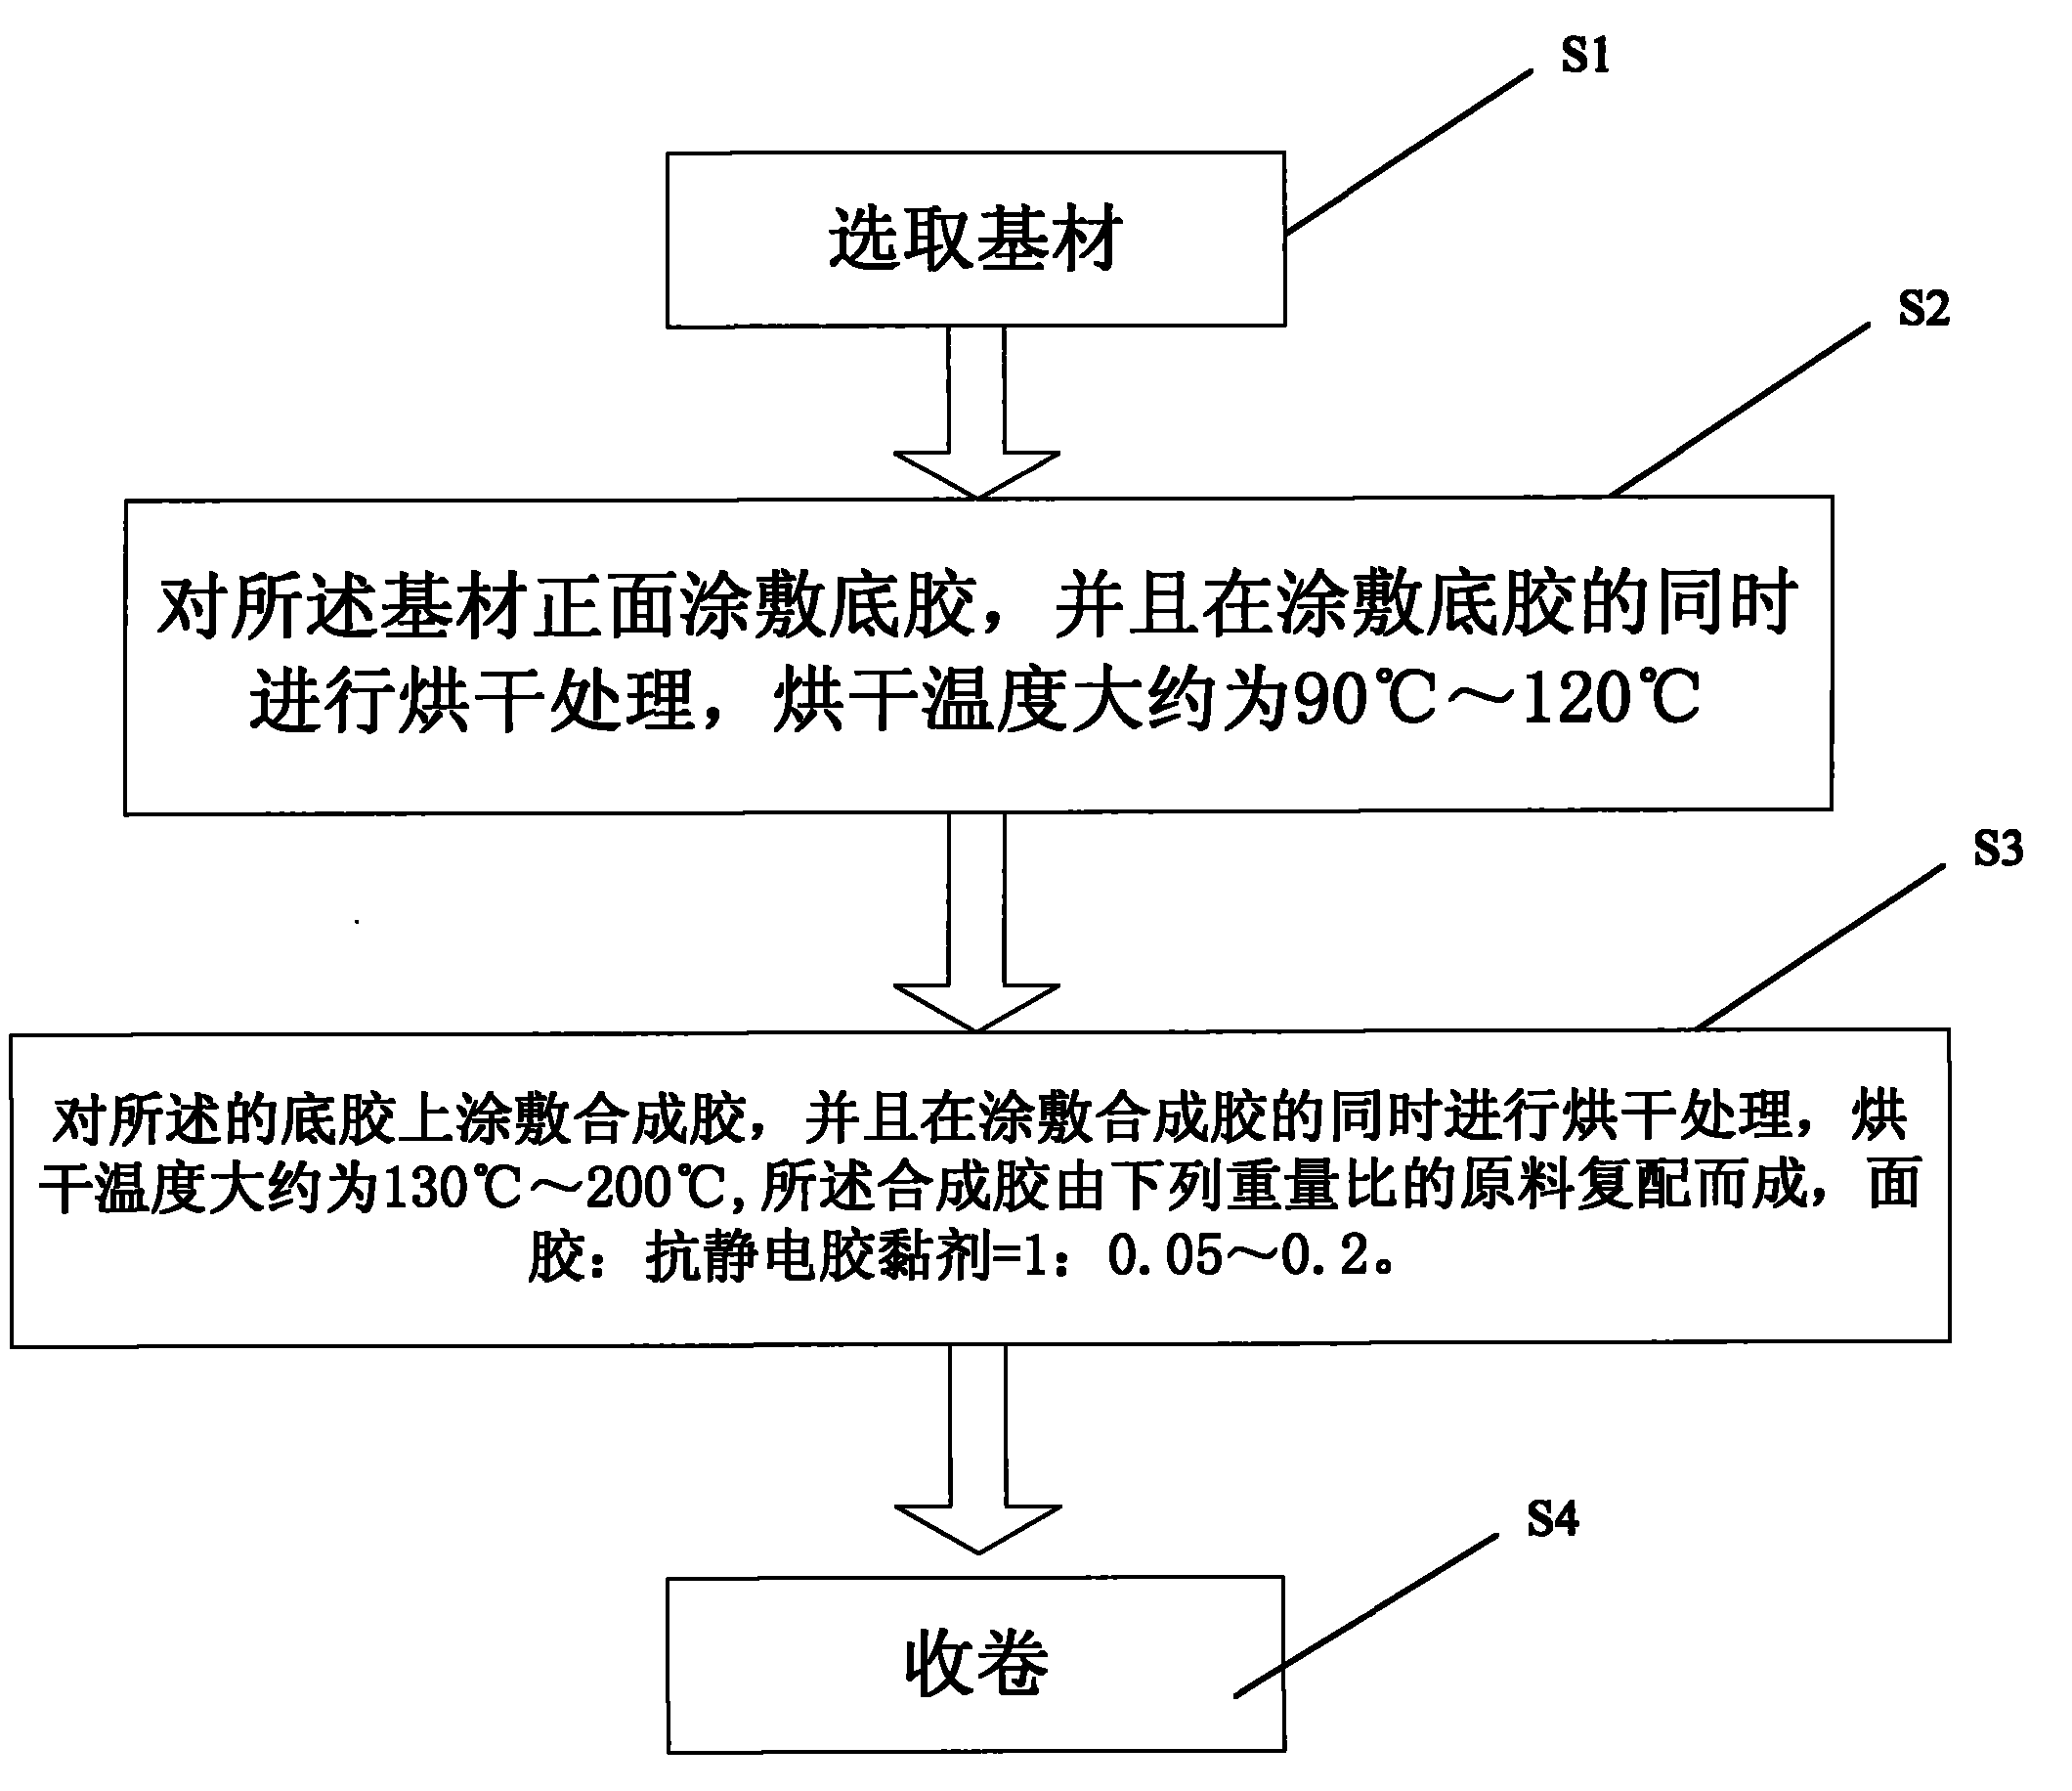 Processing method of antistatic adhesive tapes